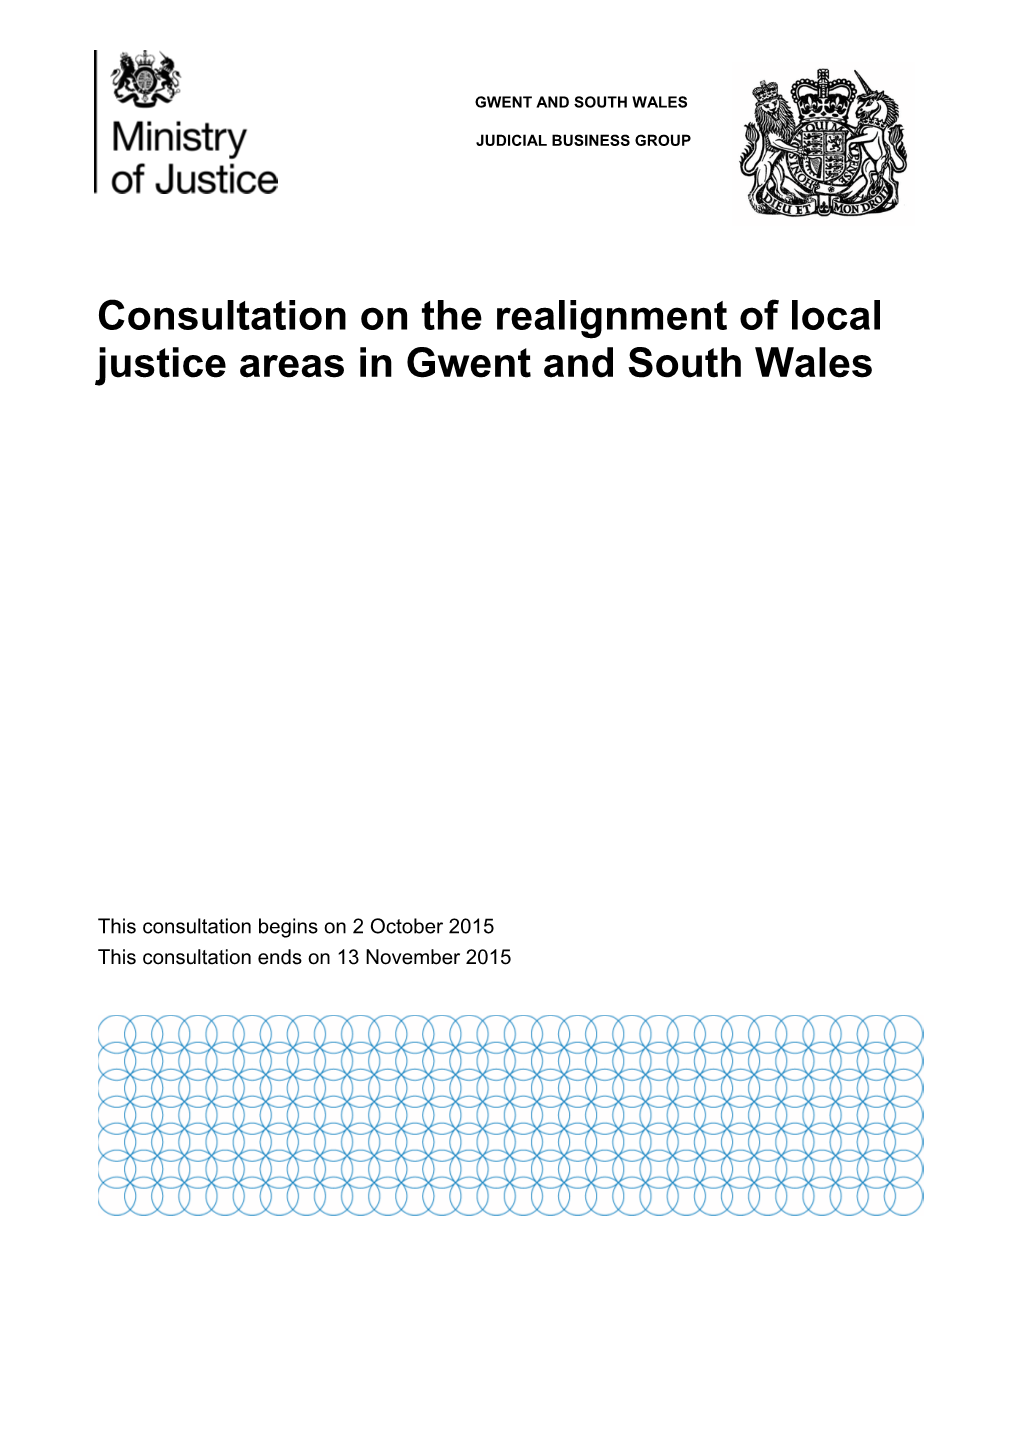 Consultation on the Realignment of Local Justice Areas in Gwent and South Wales